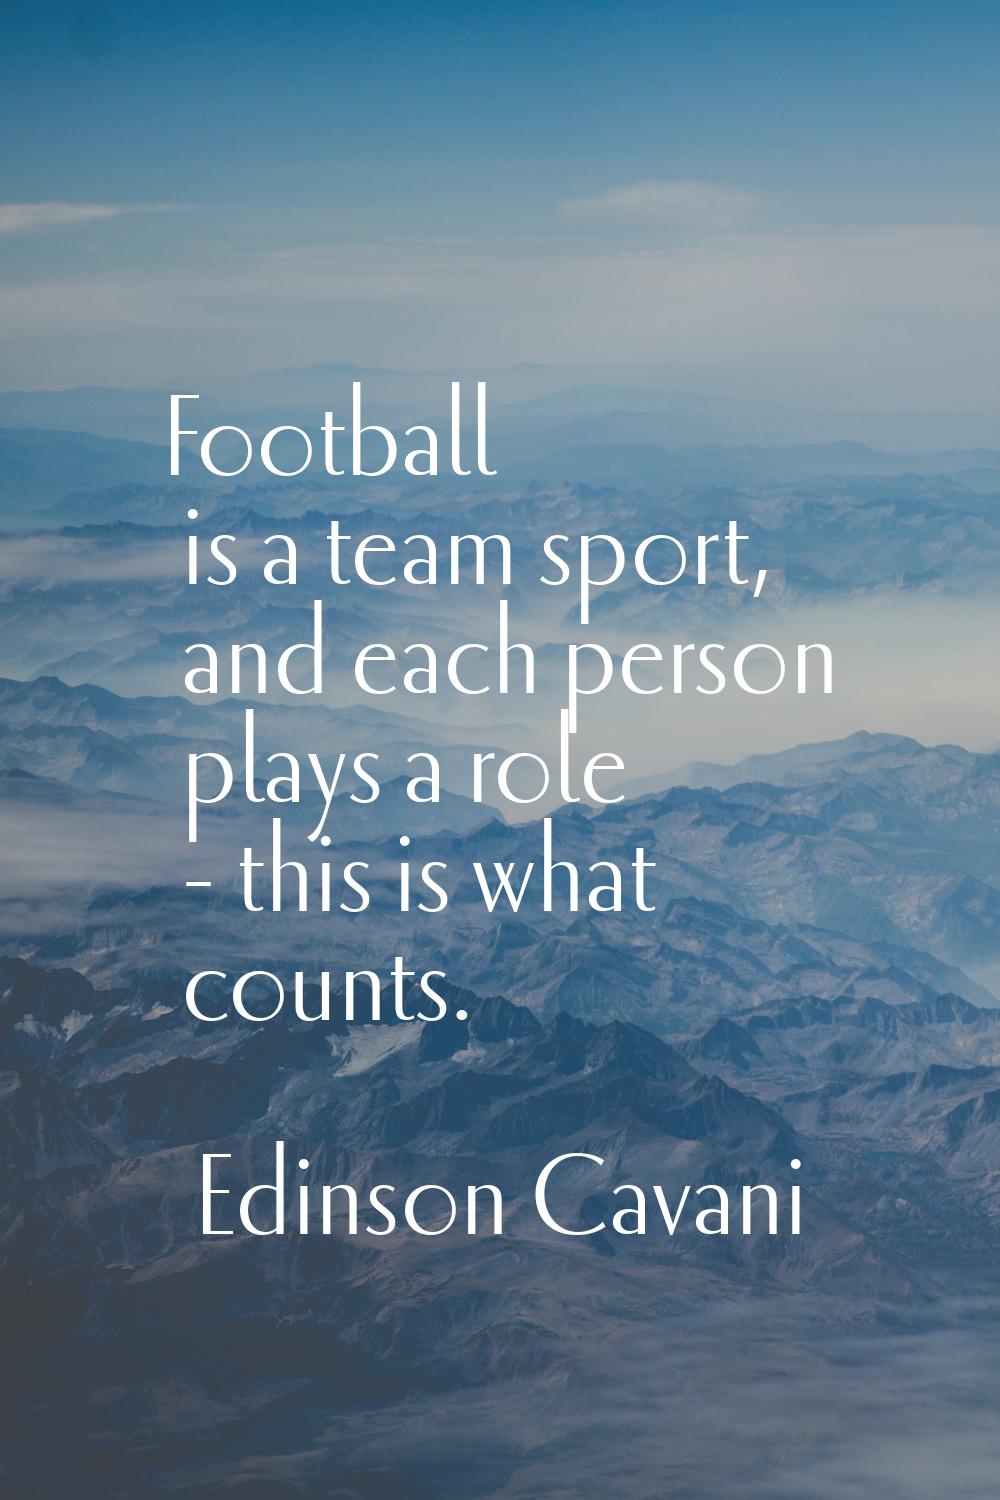 Football is a team sport, and each person plays a role - this is what counts.